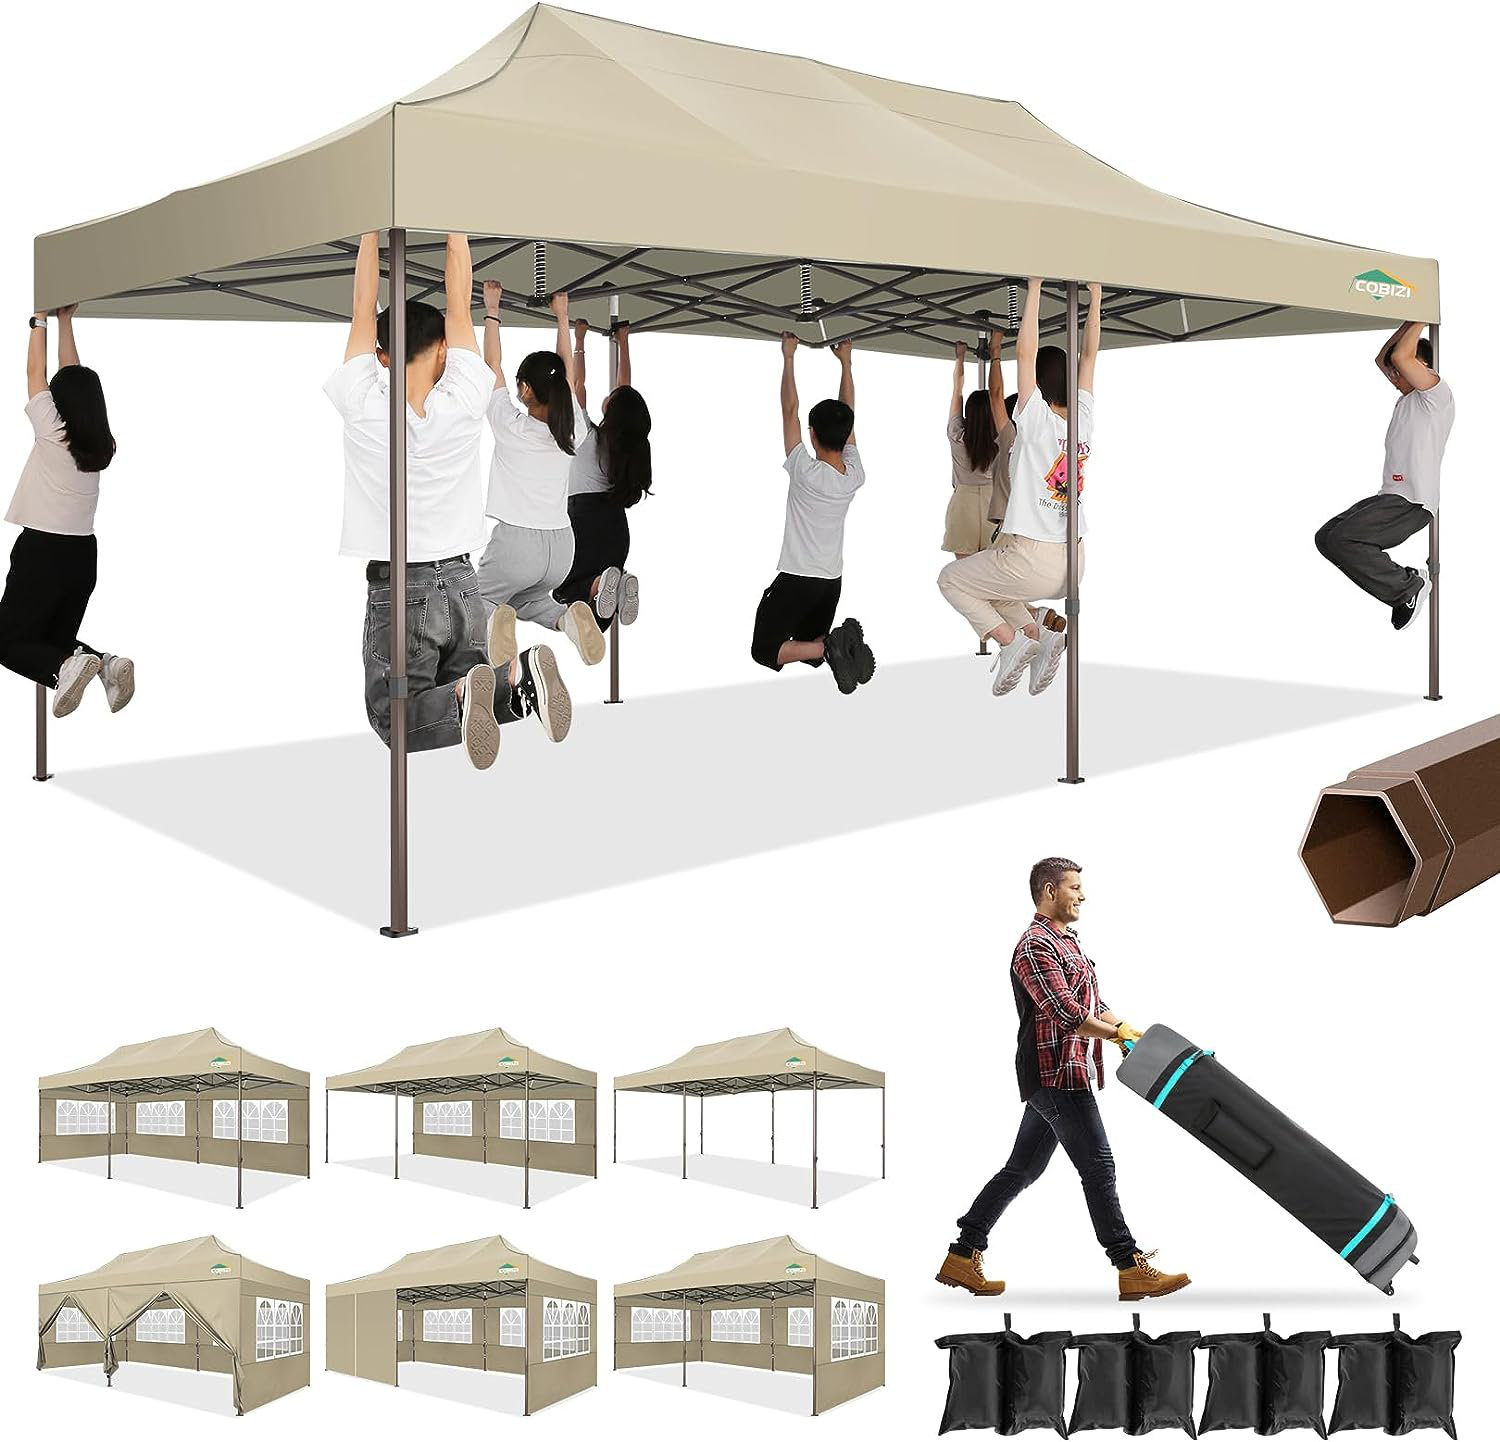 Upgraded Legs 10x20 Heavy Duty Pop Up Canopy Tent Waterproof Wedding Tent with 6 Removable Sidewalls DreamDwell Home Roof Color: Khaki